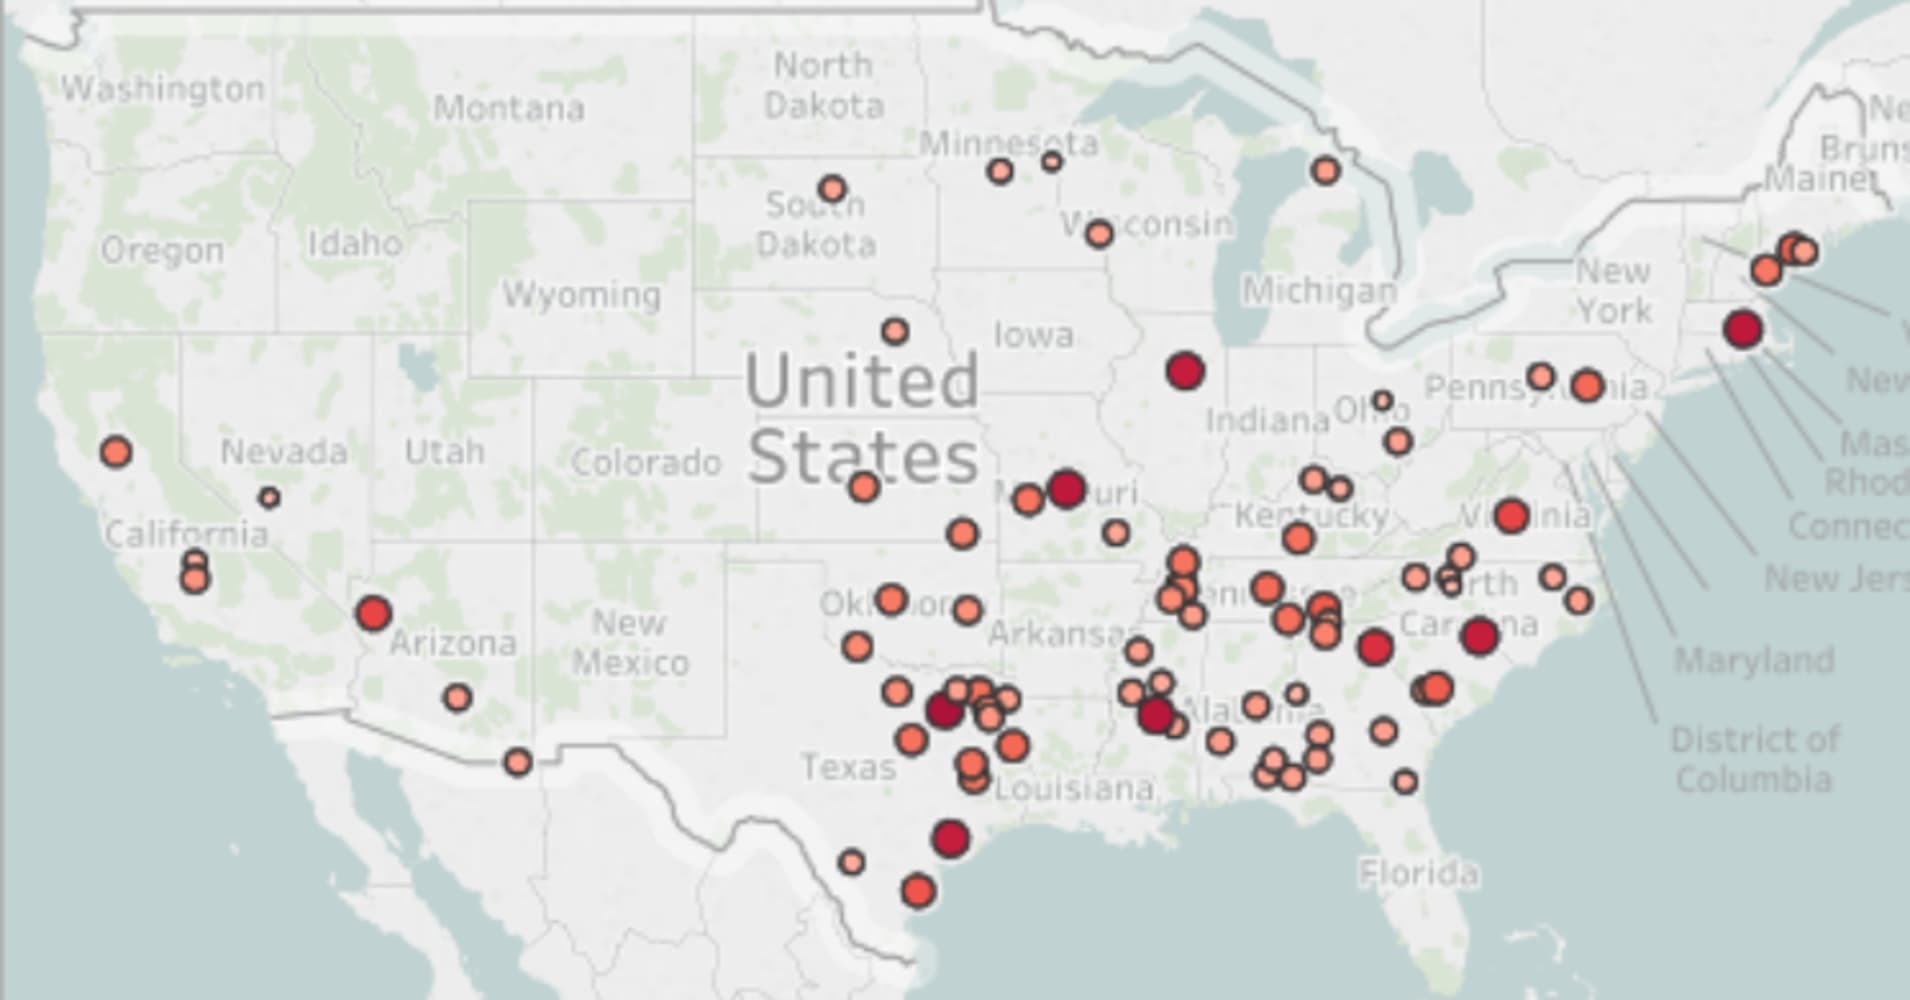 Here's a map of where rural hospital closures are happening in the US